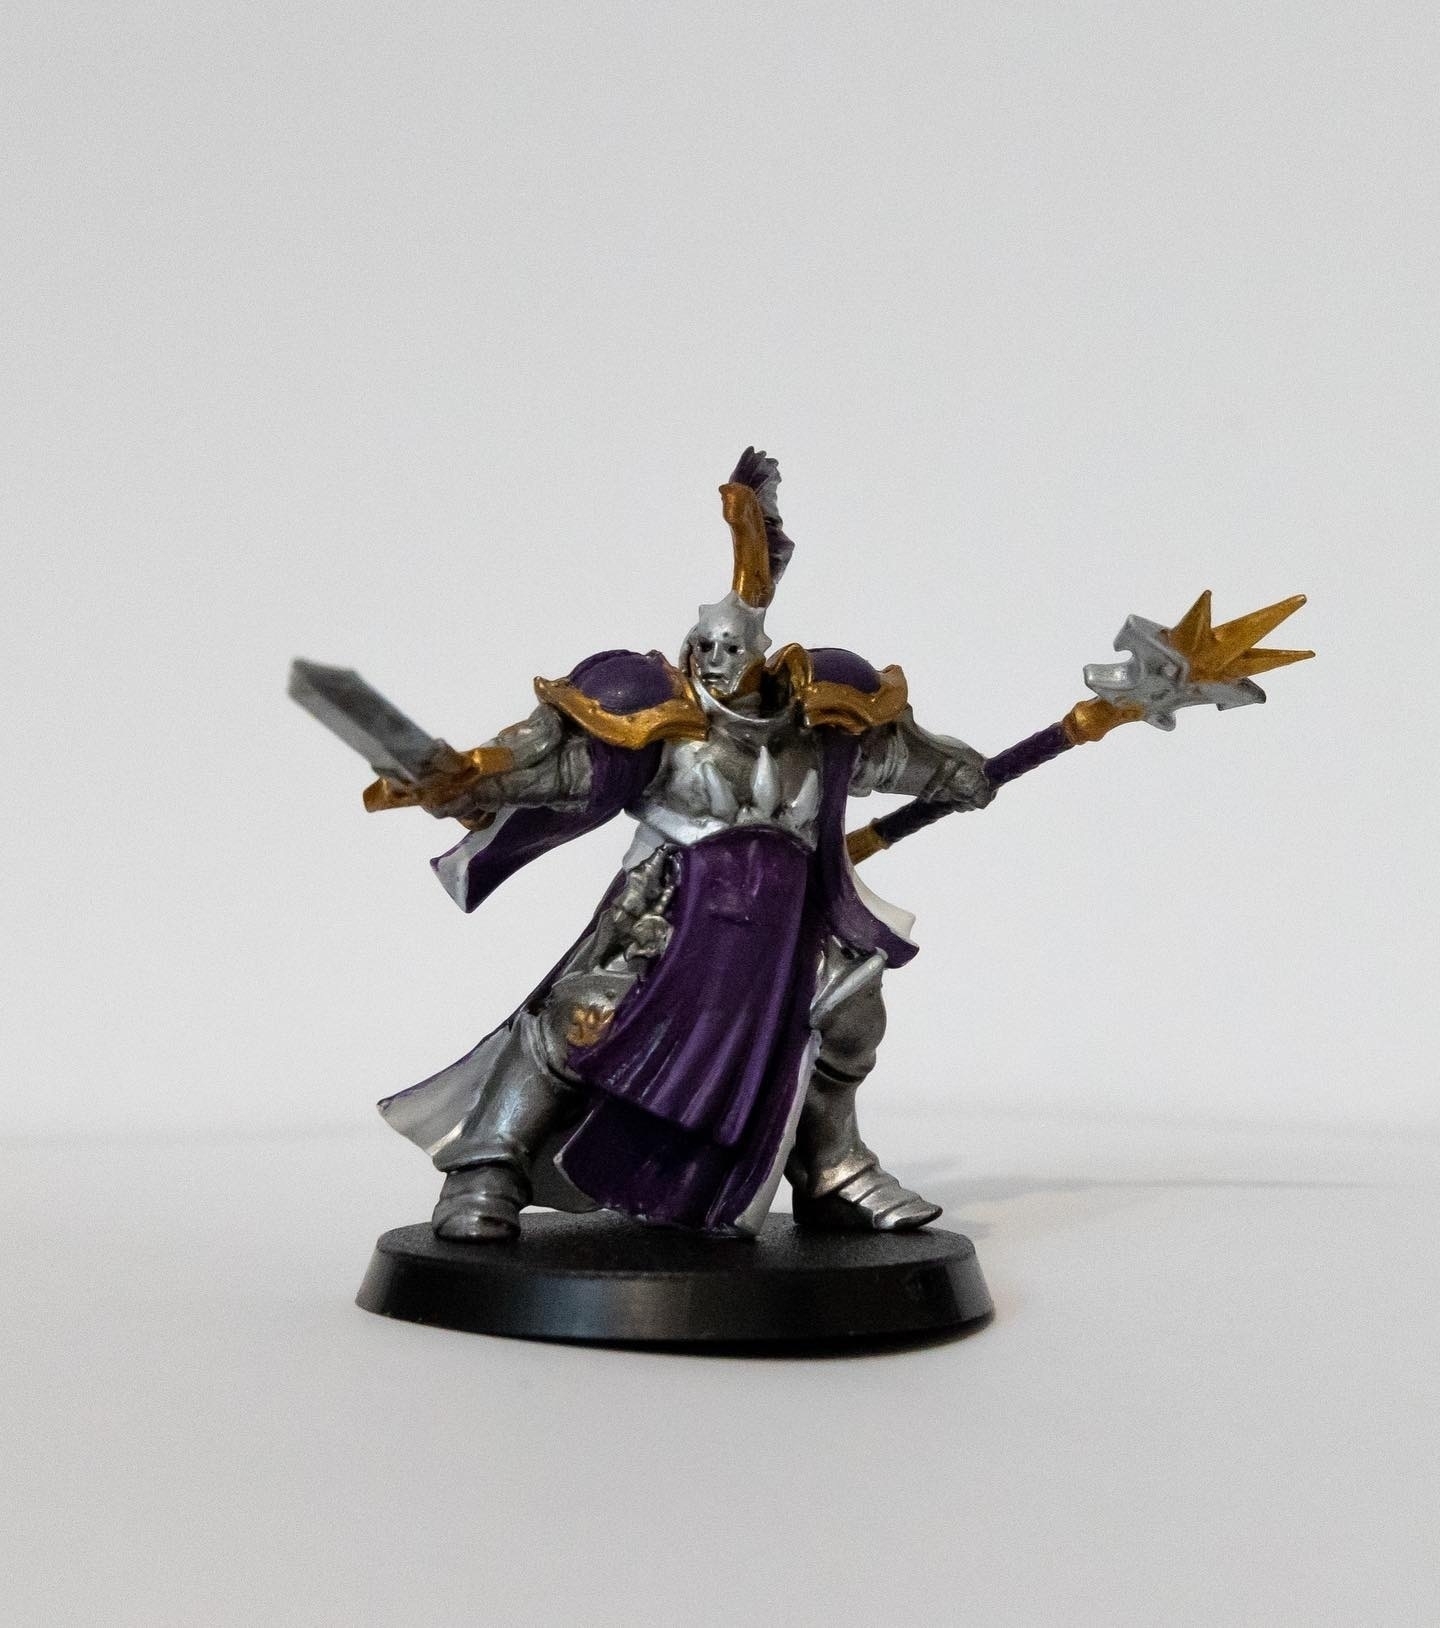 Picture of Stormcast Eternal model in silver with white and purple robes